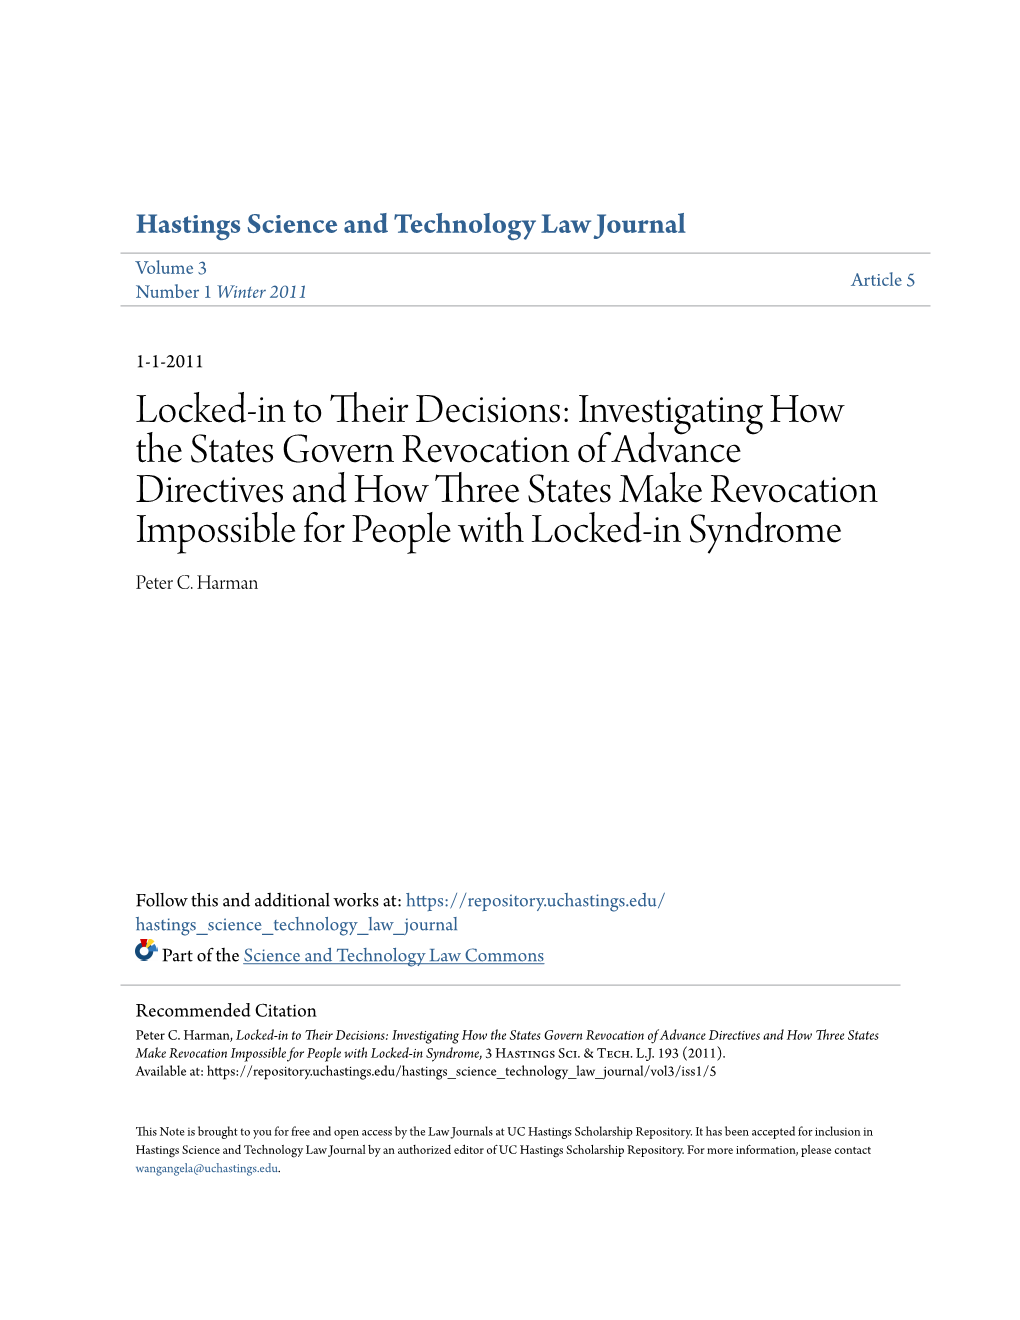 Investigating How the States Govern Revocation of Advance Directives and How Three States Make Revocation Impossible for People with Locked-In Syndrome Peter C